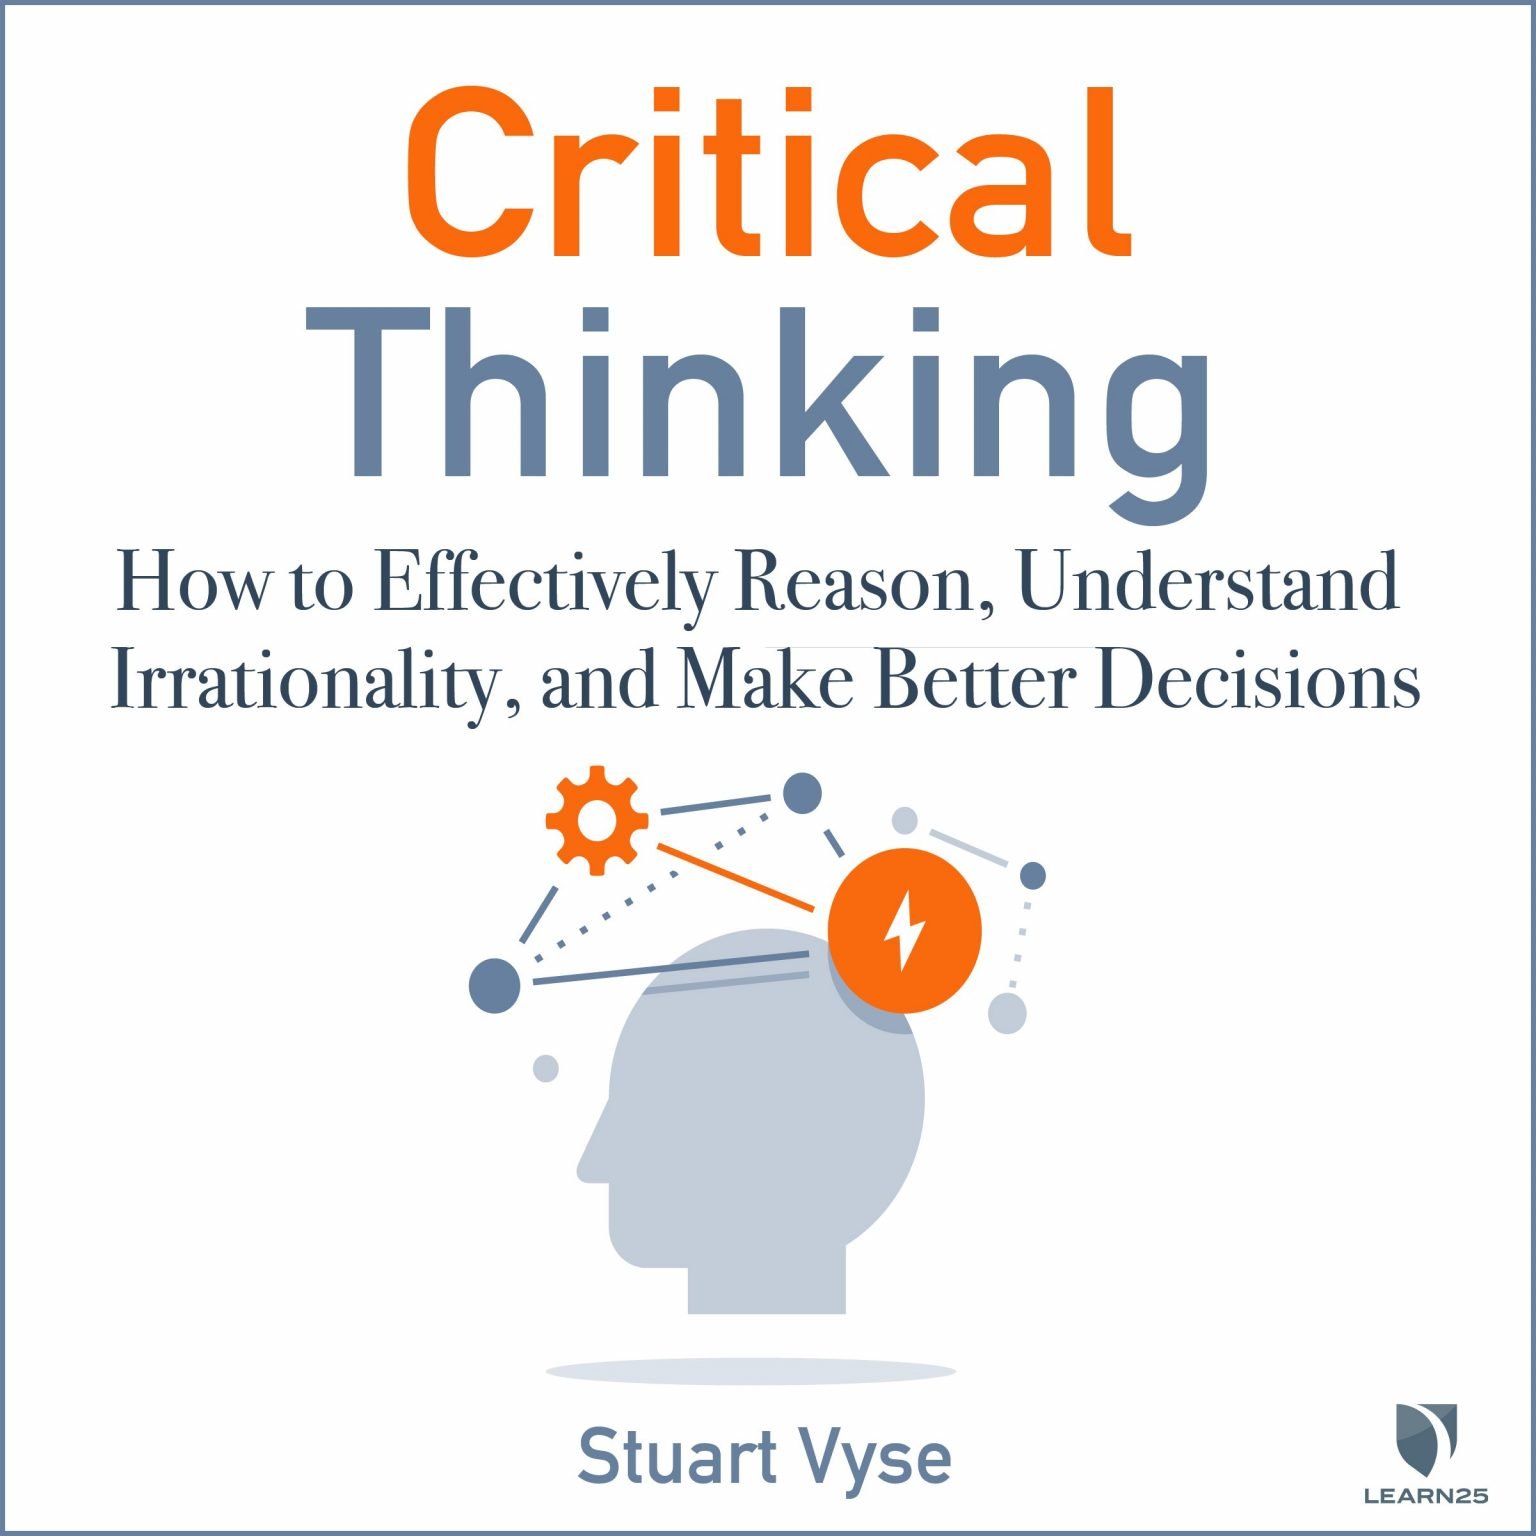 critical thinking is rational